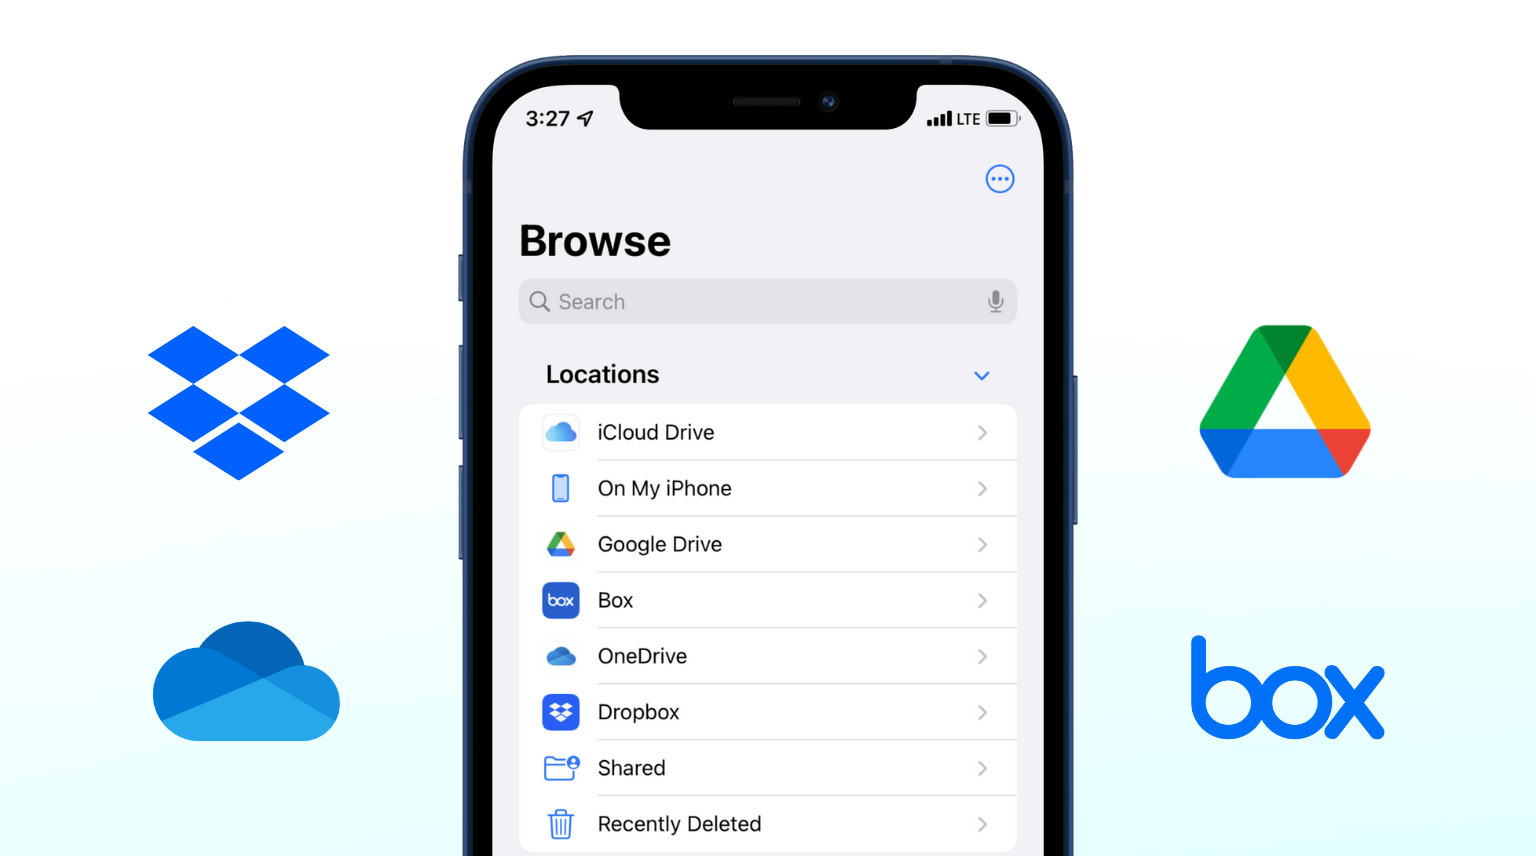 How to use Google Drive, Dropbox, etc, in Files app on iPhone and iPad